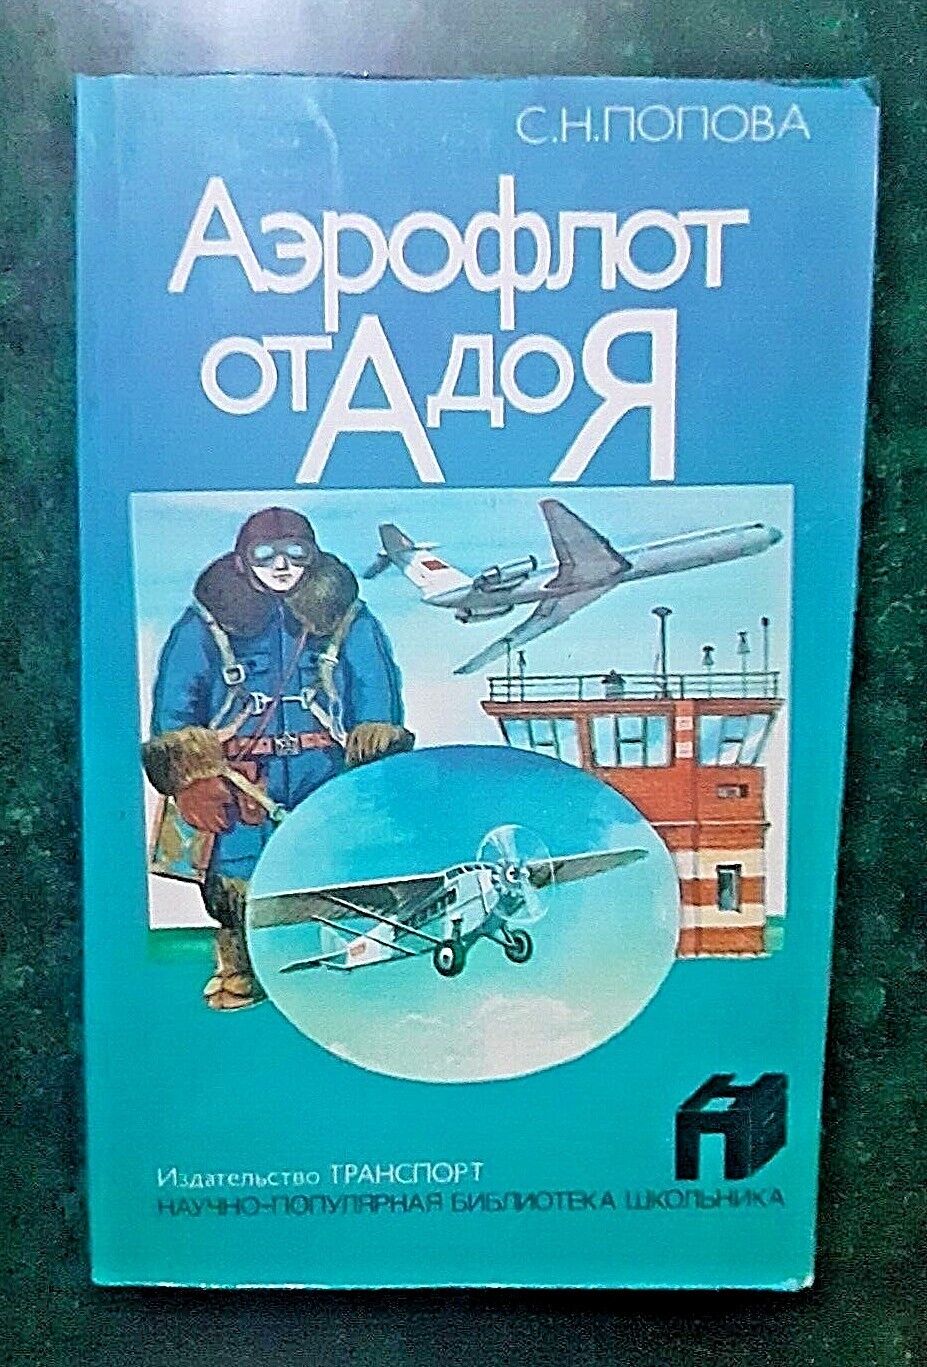 1986 Aeroflot Airlines Aircrafts Helicopter Aviation Plane Popova Russian book